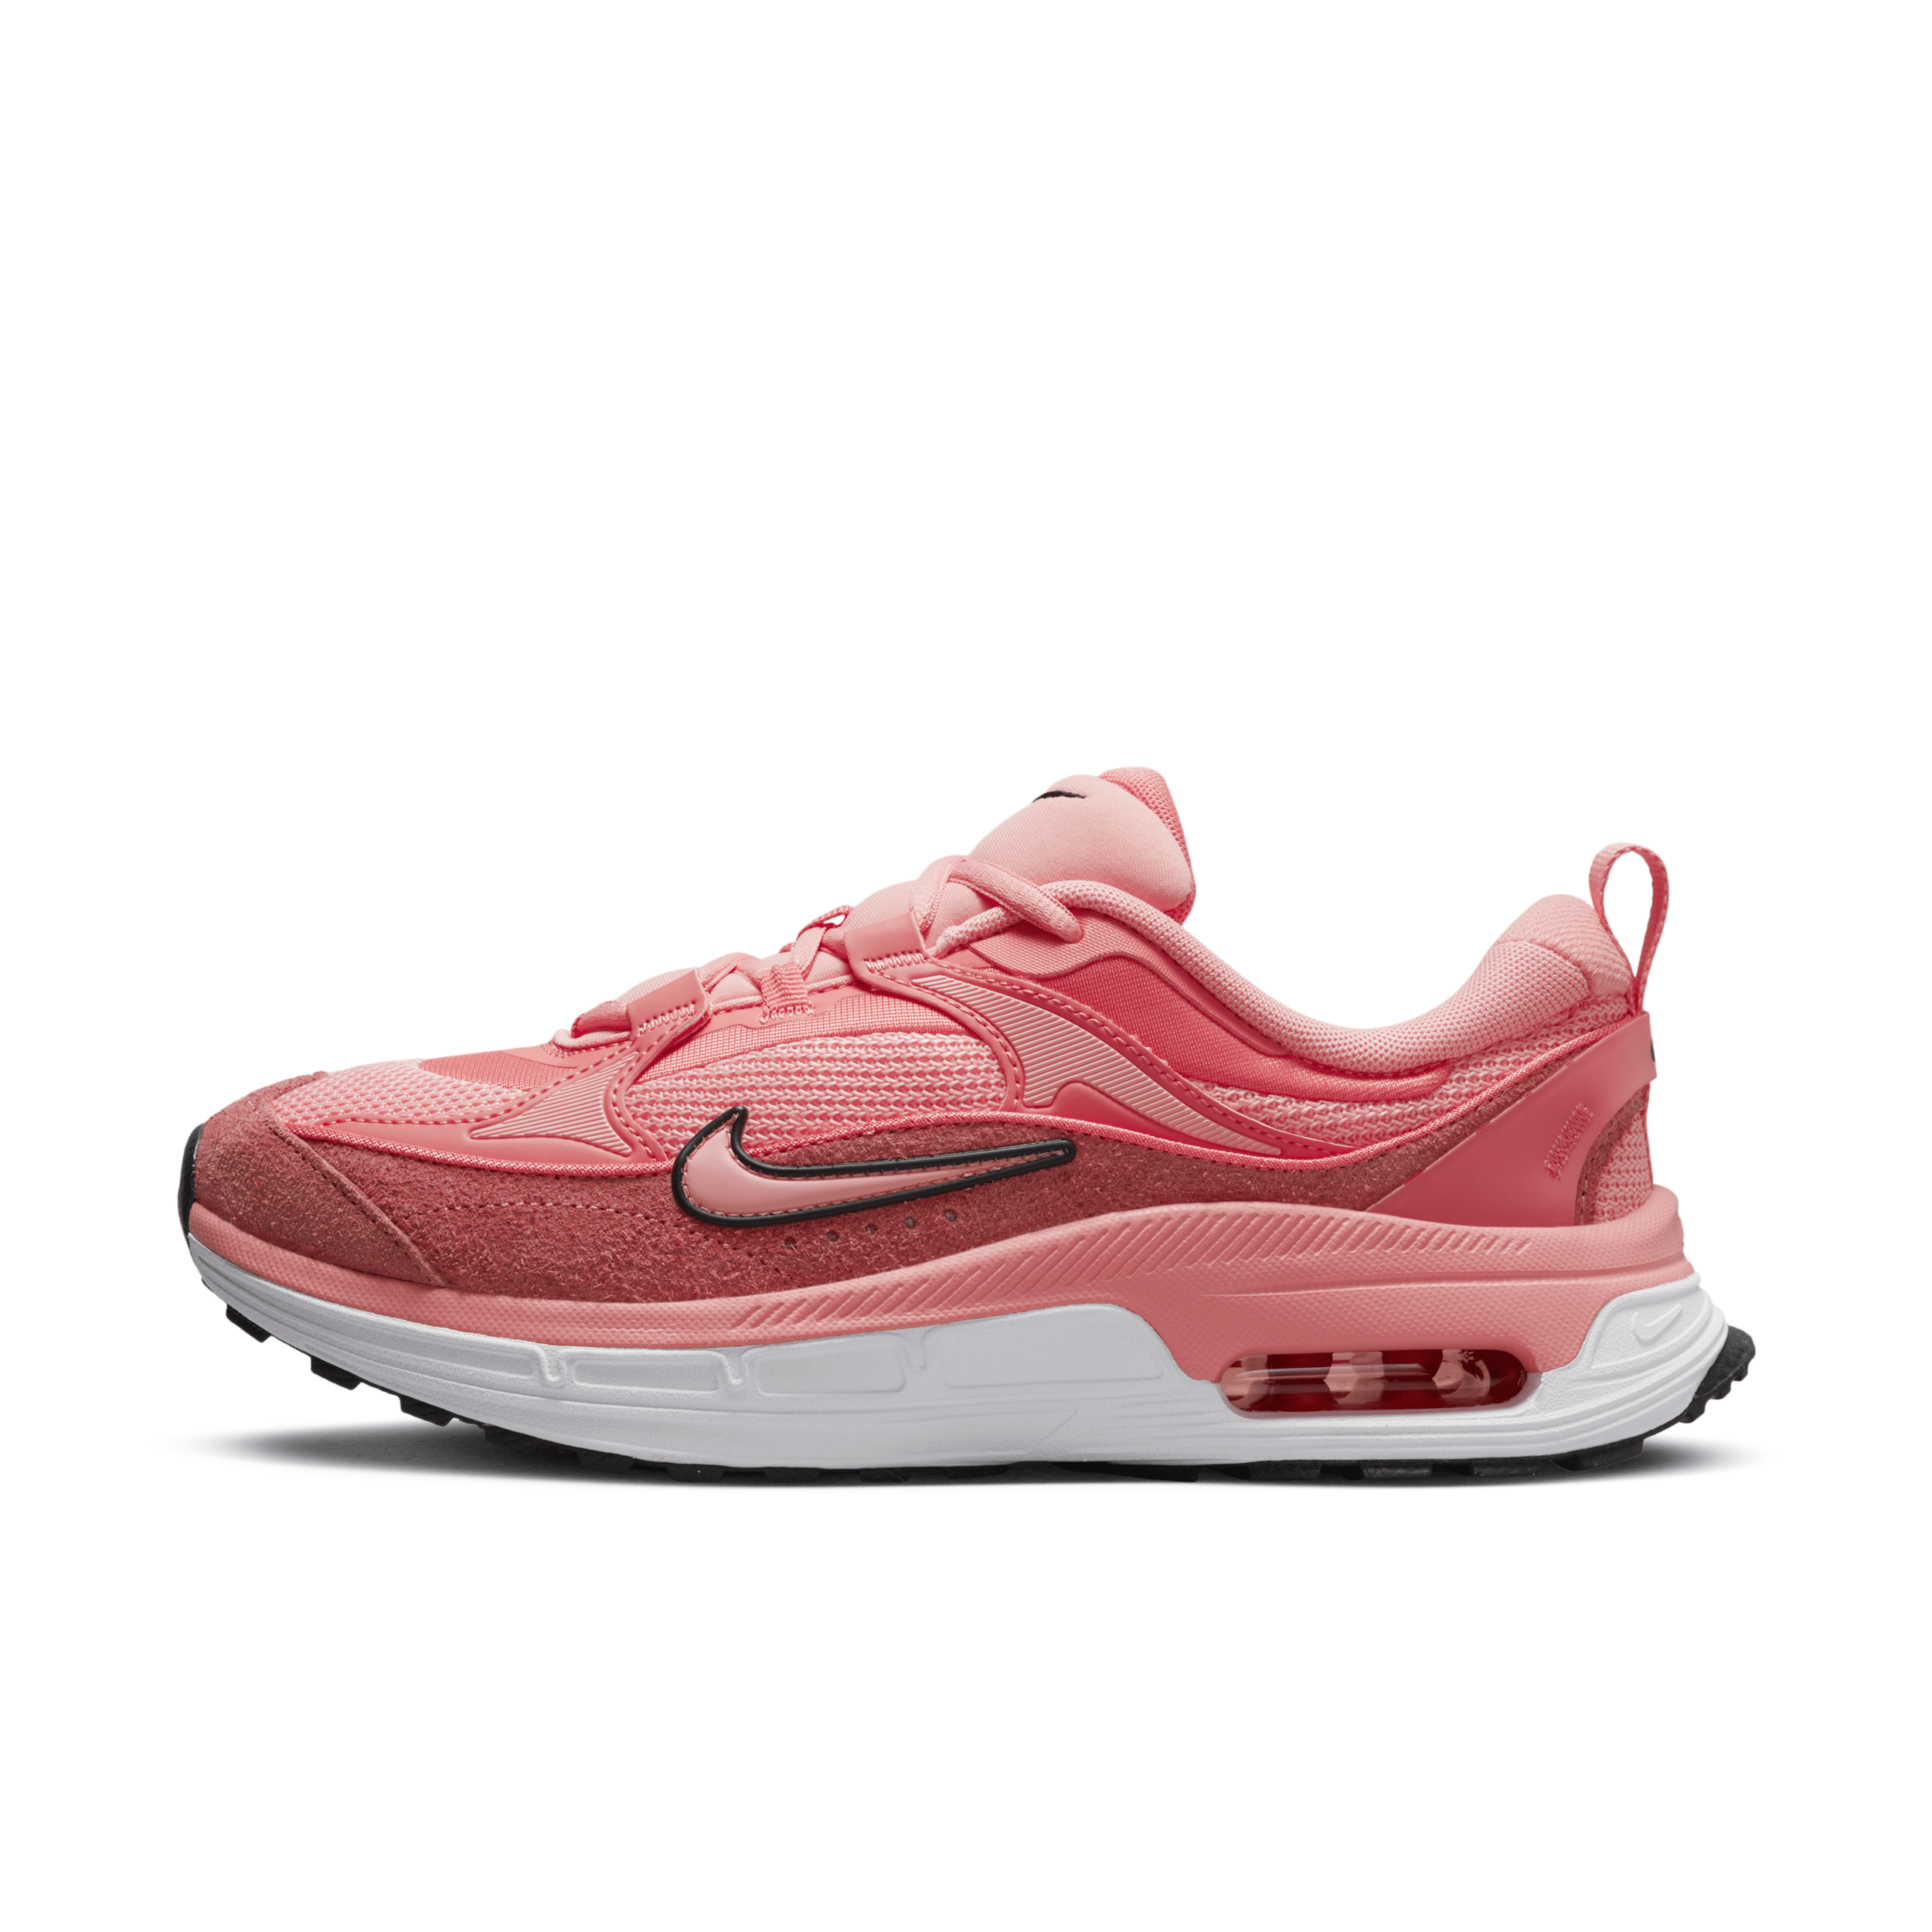 NIKE WOMEN'S AIR MAX BLISS SHOES,1010047239